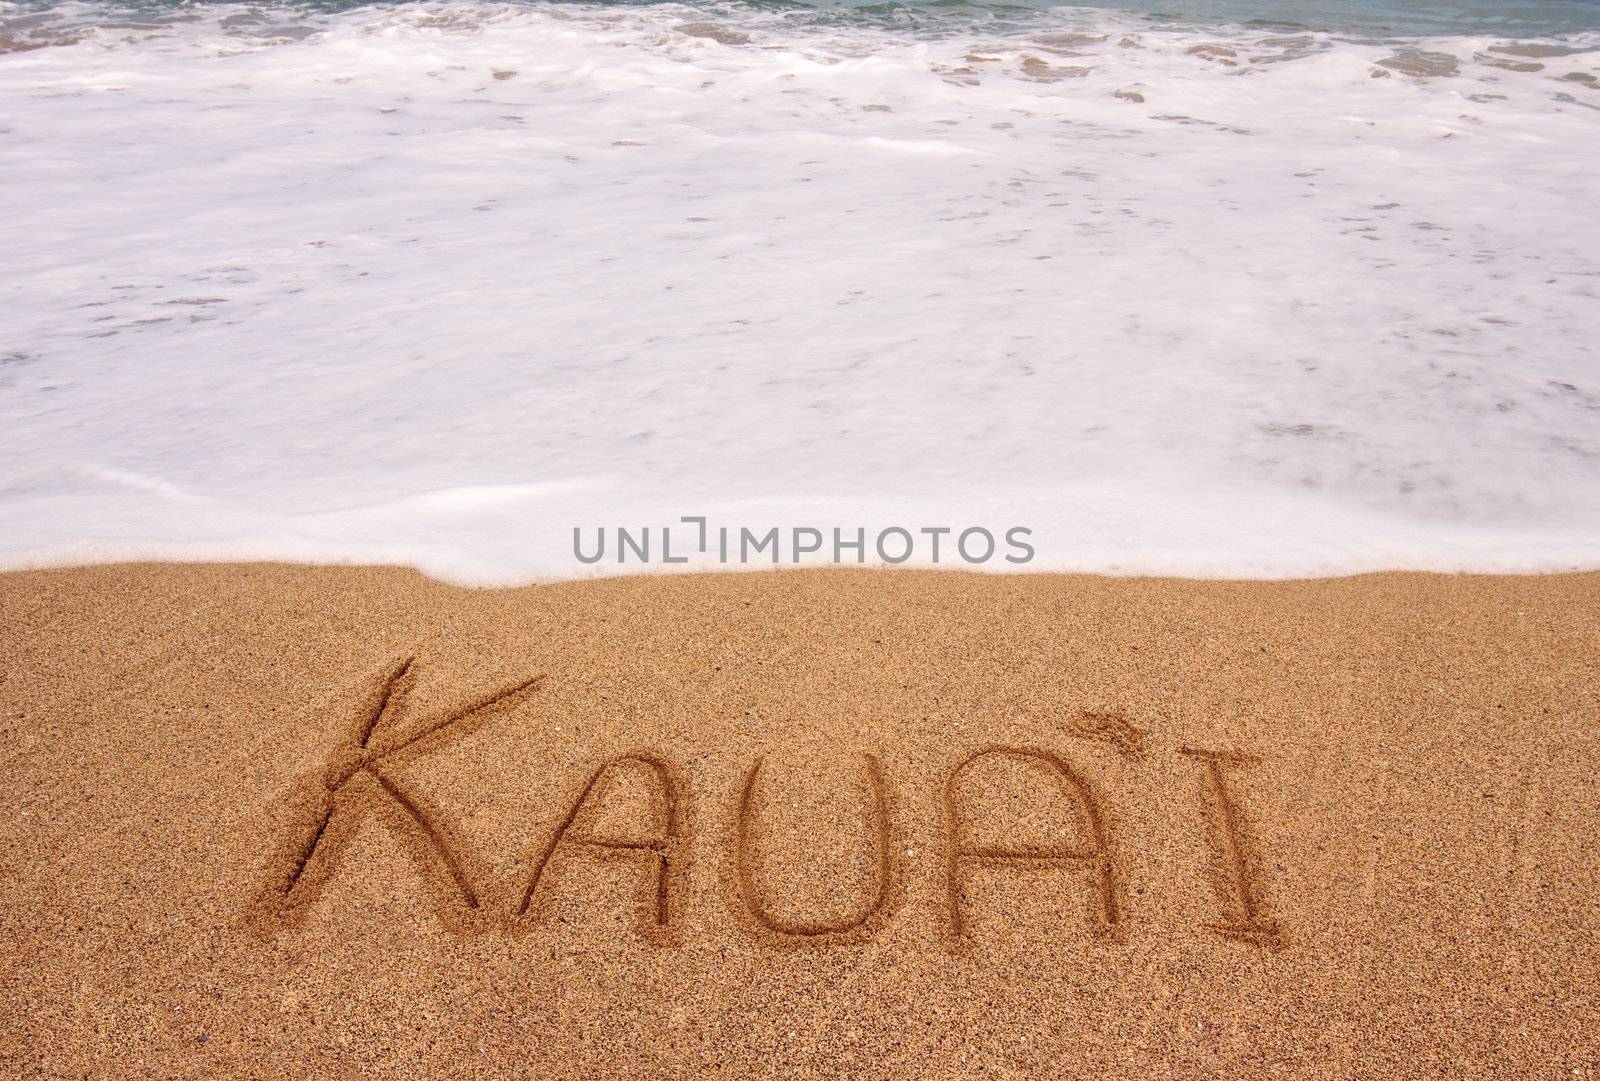 White foam of the tide coming towards the name Kauai scratched in the sand